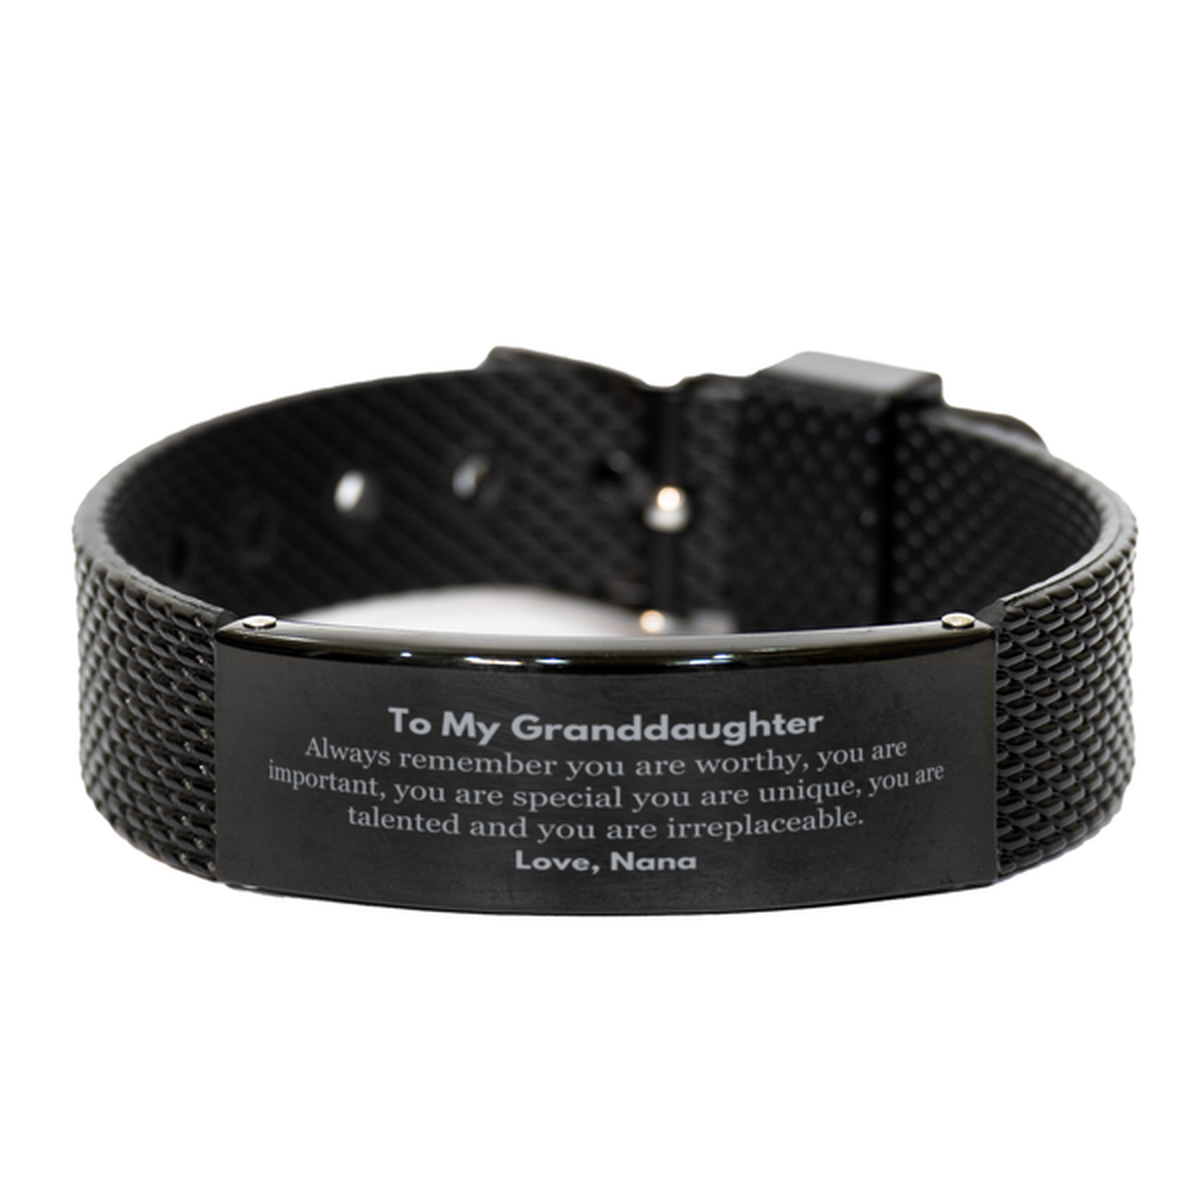 Granddaughter Birthday Gifts from Nana, Inspirational Black Shark Mesh Bracelet for Granddaughter Christmas Graduation Gifts for Granddaughter Always remember you are worthy, you are important. Love, Nana